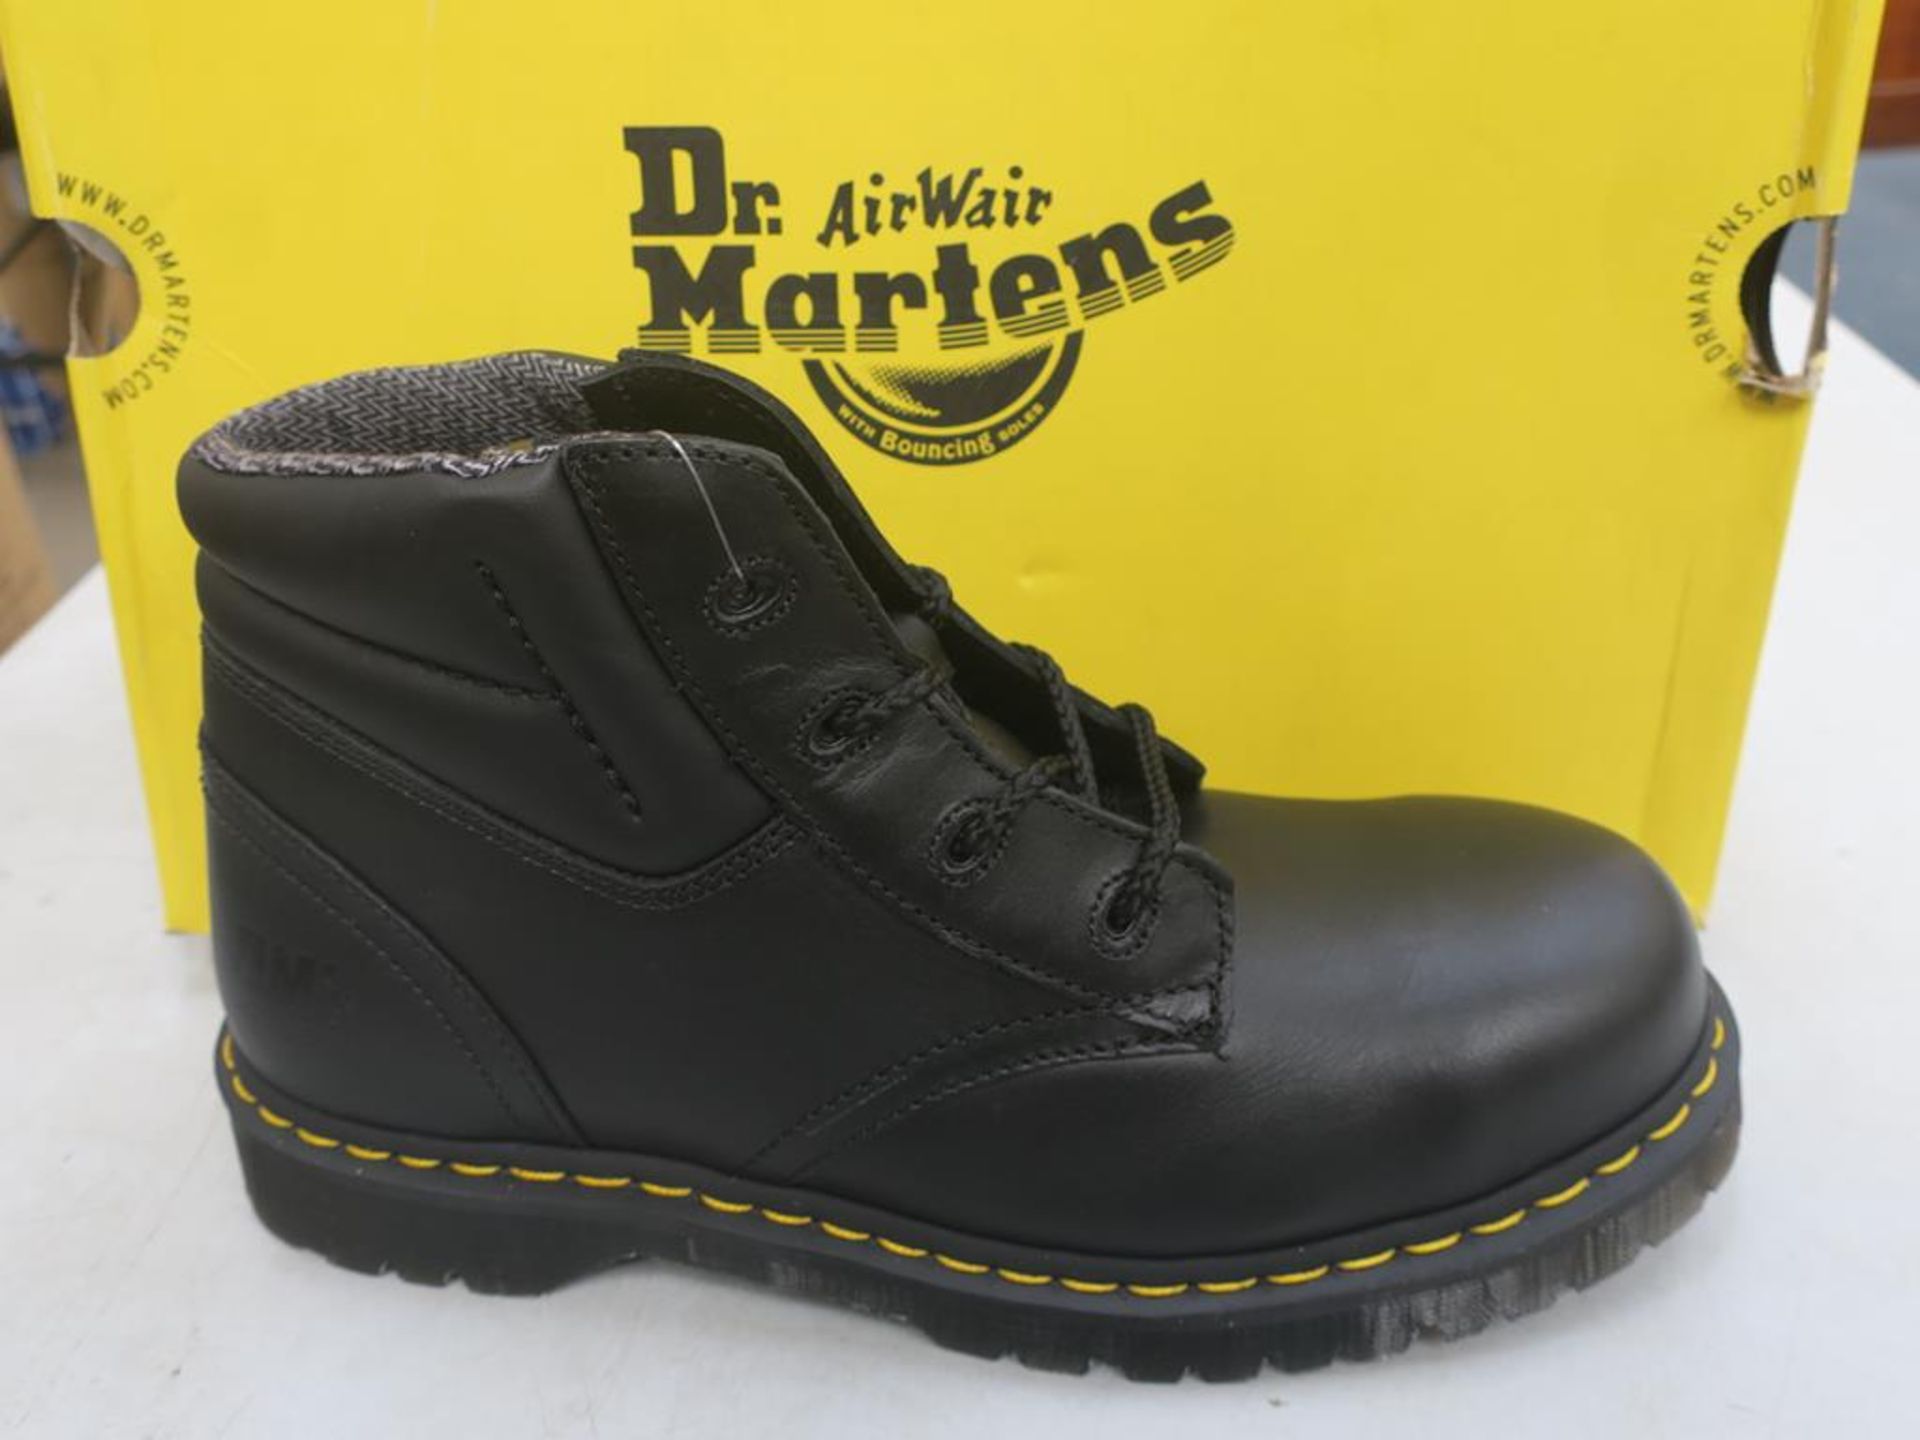 * A pair of New/Boxed Dr Martens Boots, Icon 7B09 SSF, 12230001, Industrial Full Grain, in black, UK